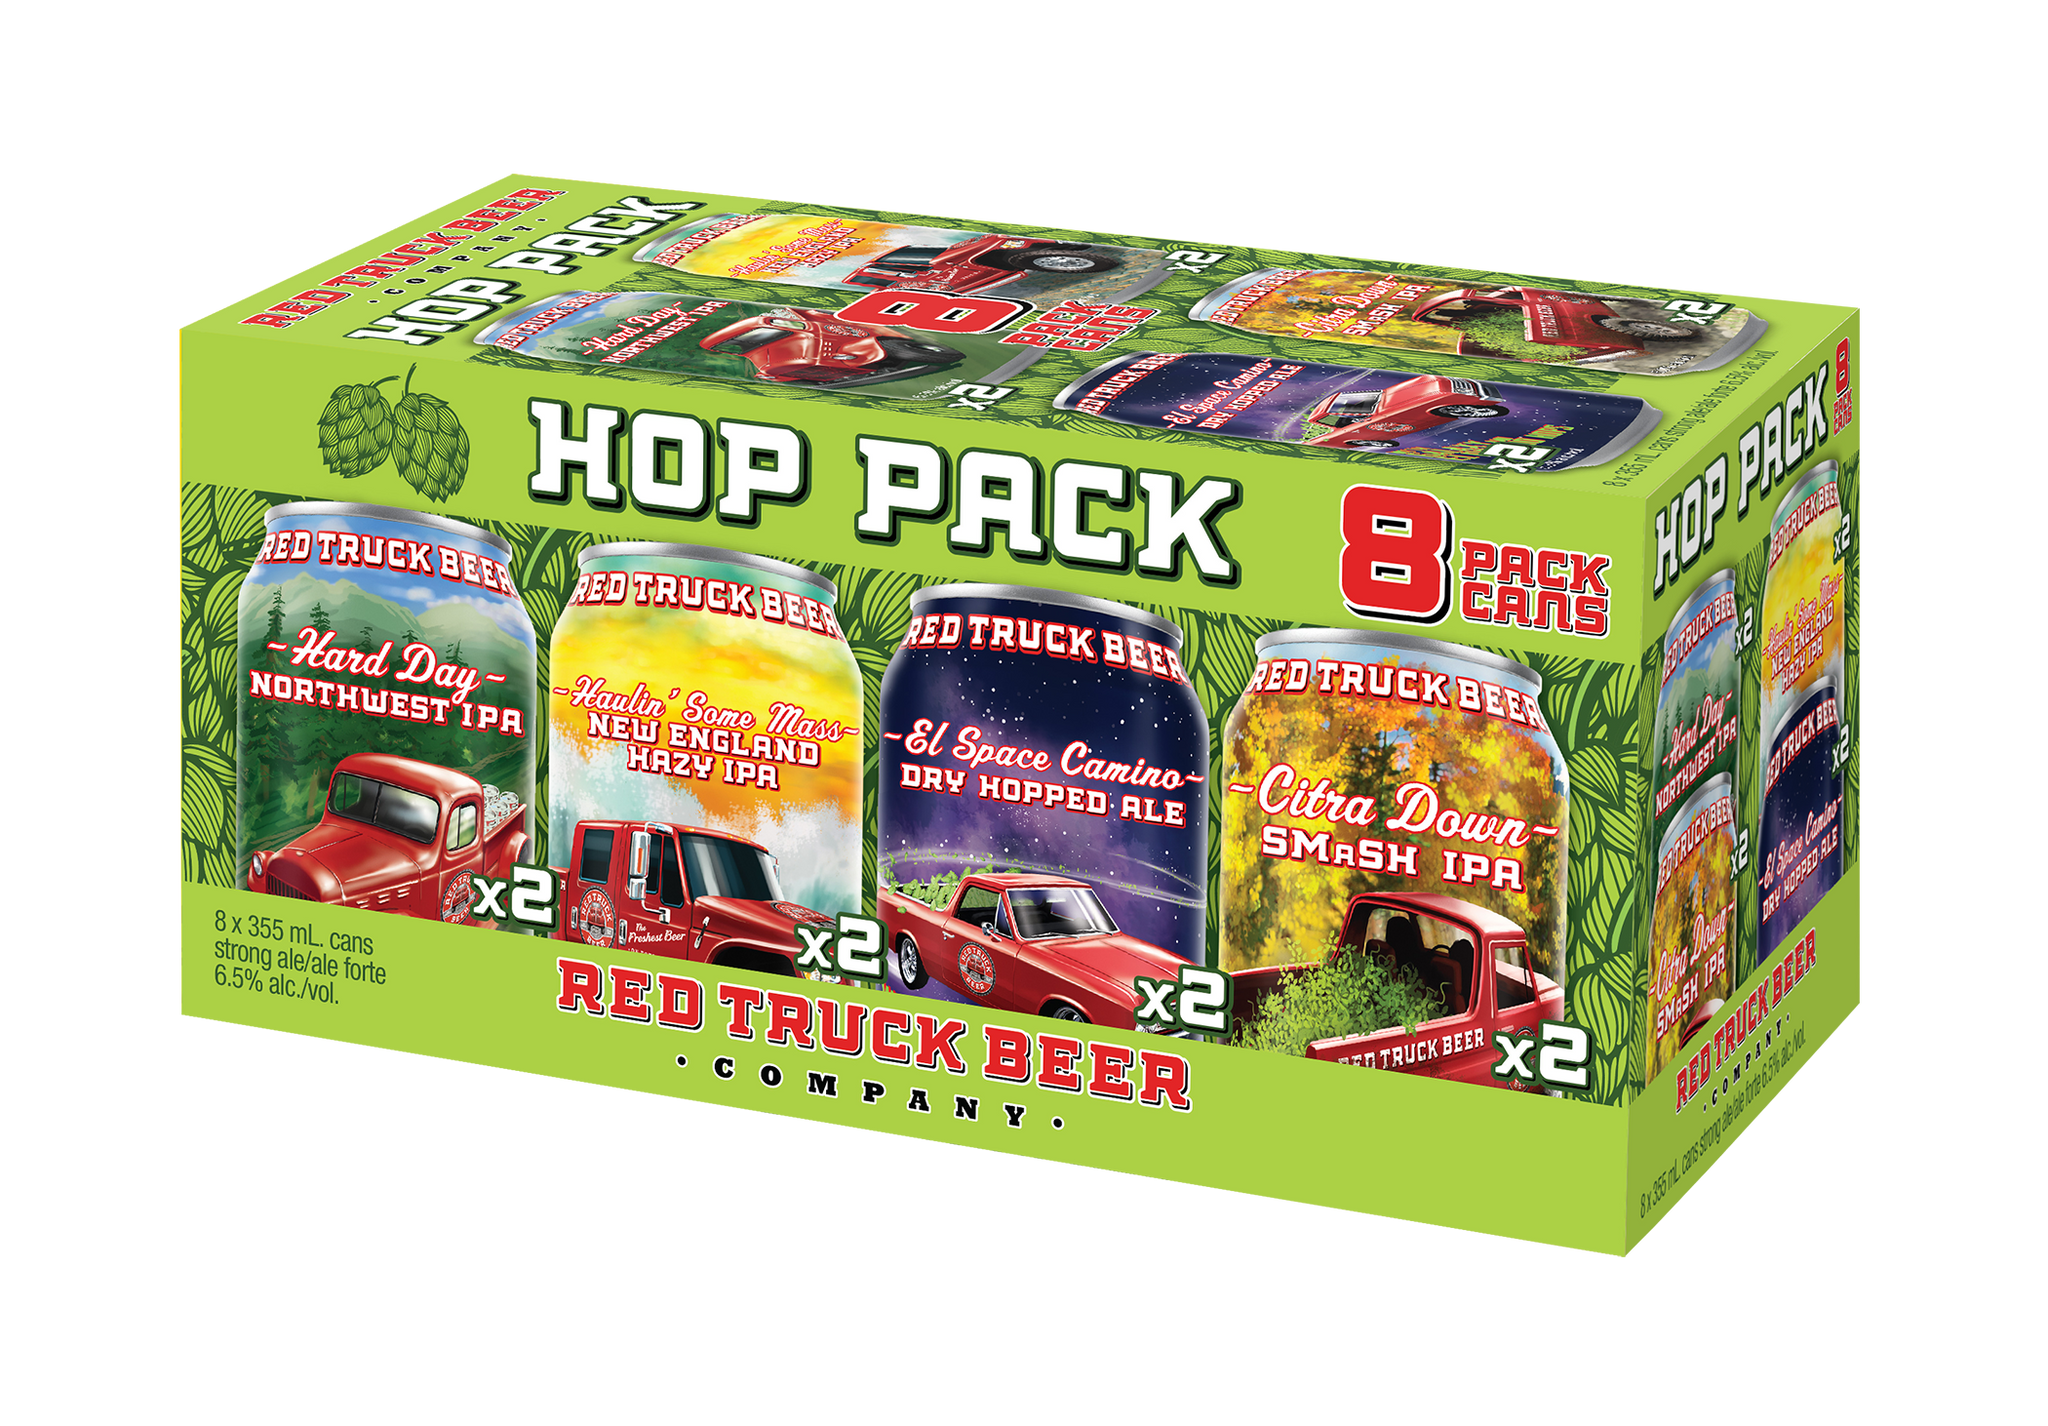 Hop Pack 8 Pack Cans